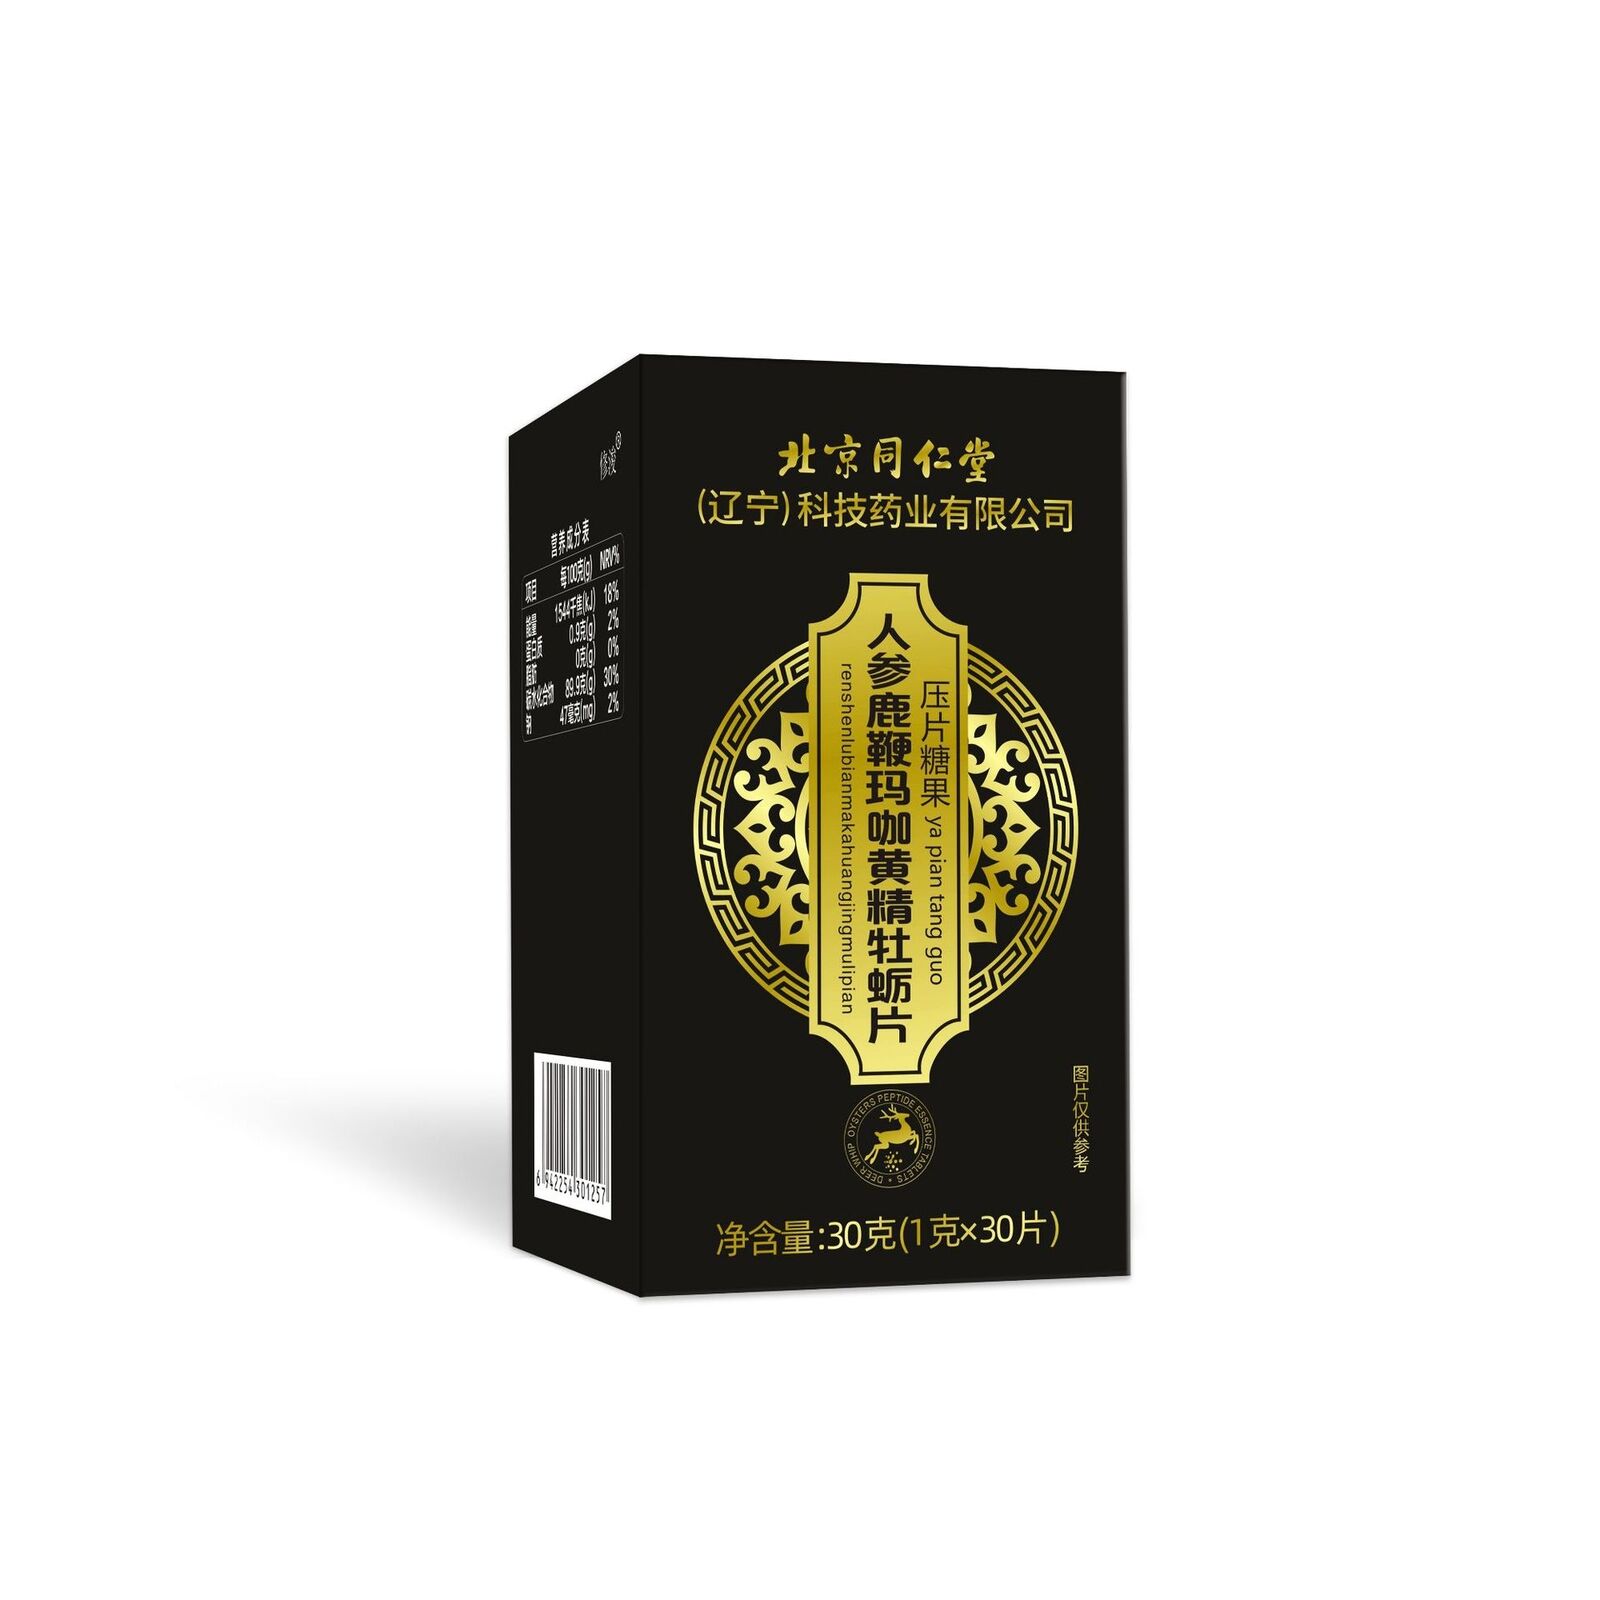 Beijing Tongrentang Ginseng Maca Yellow Essence Oyster Peptide Pressed Candy 30g